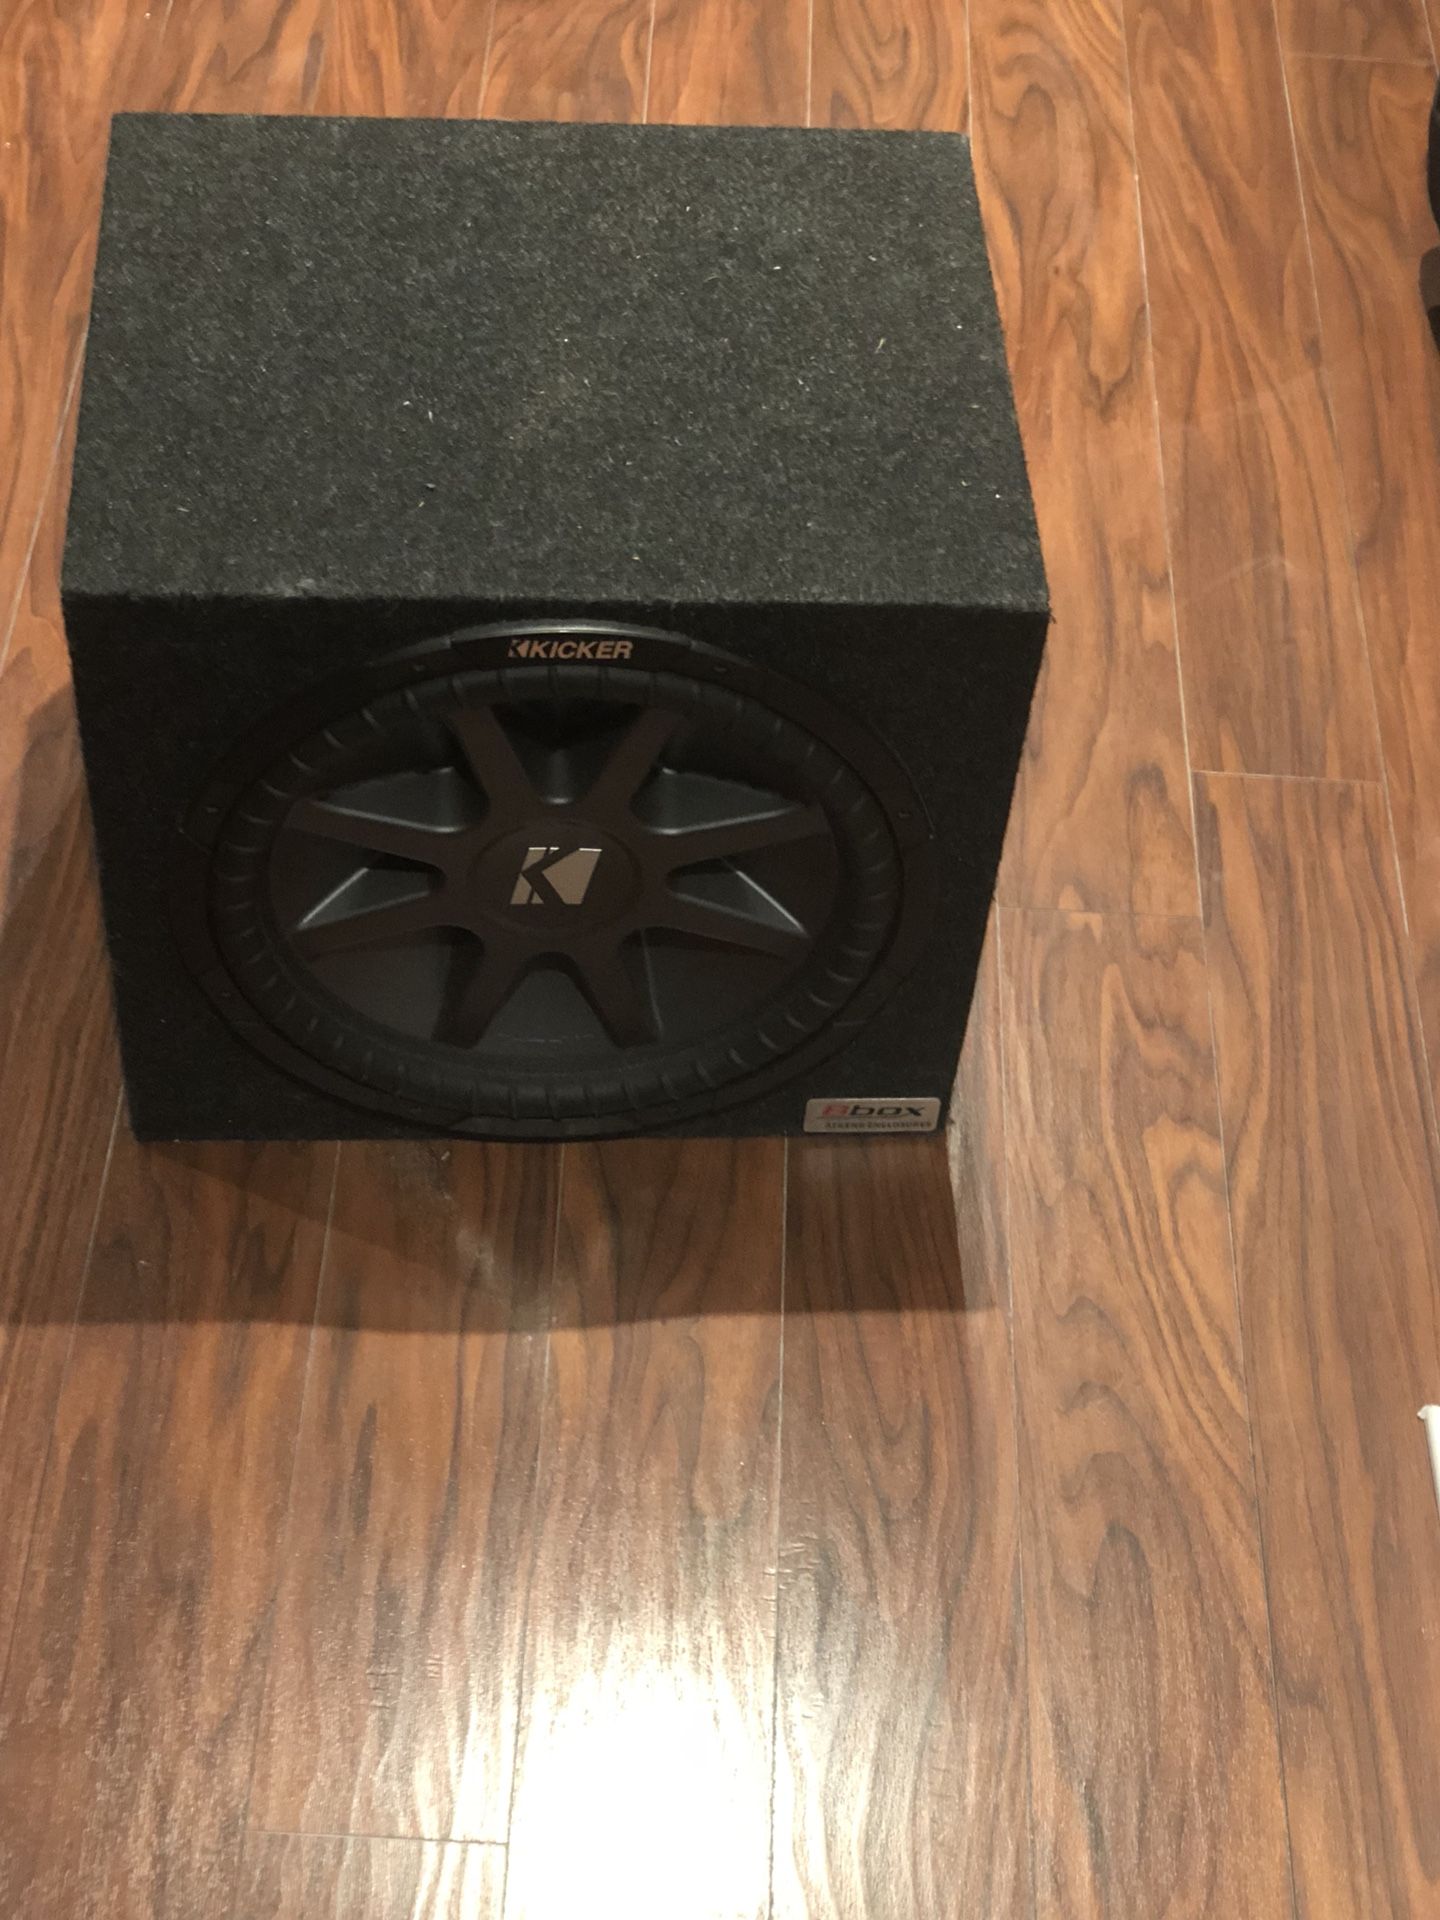 15’ Kicker Subwoofer with Box 1000W $250!! OBO